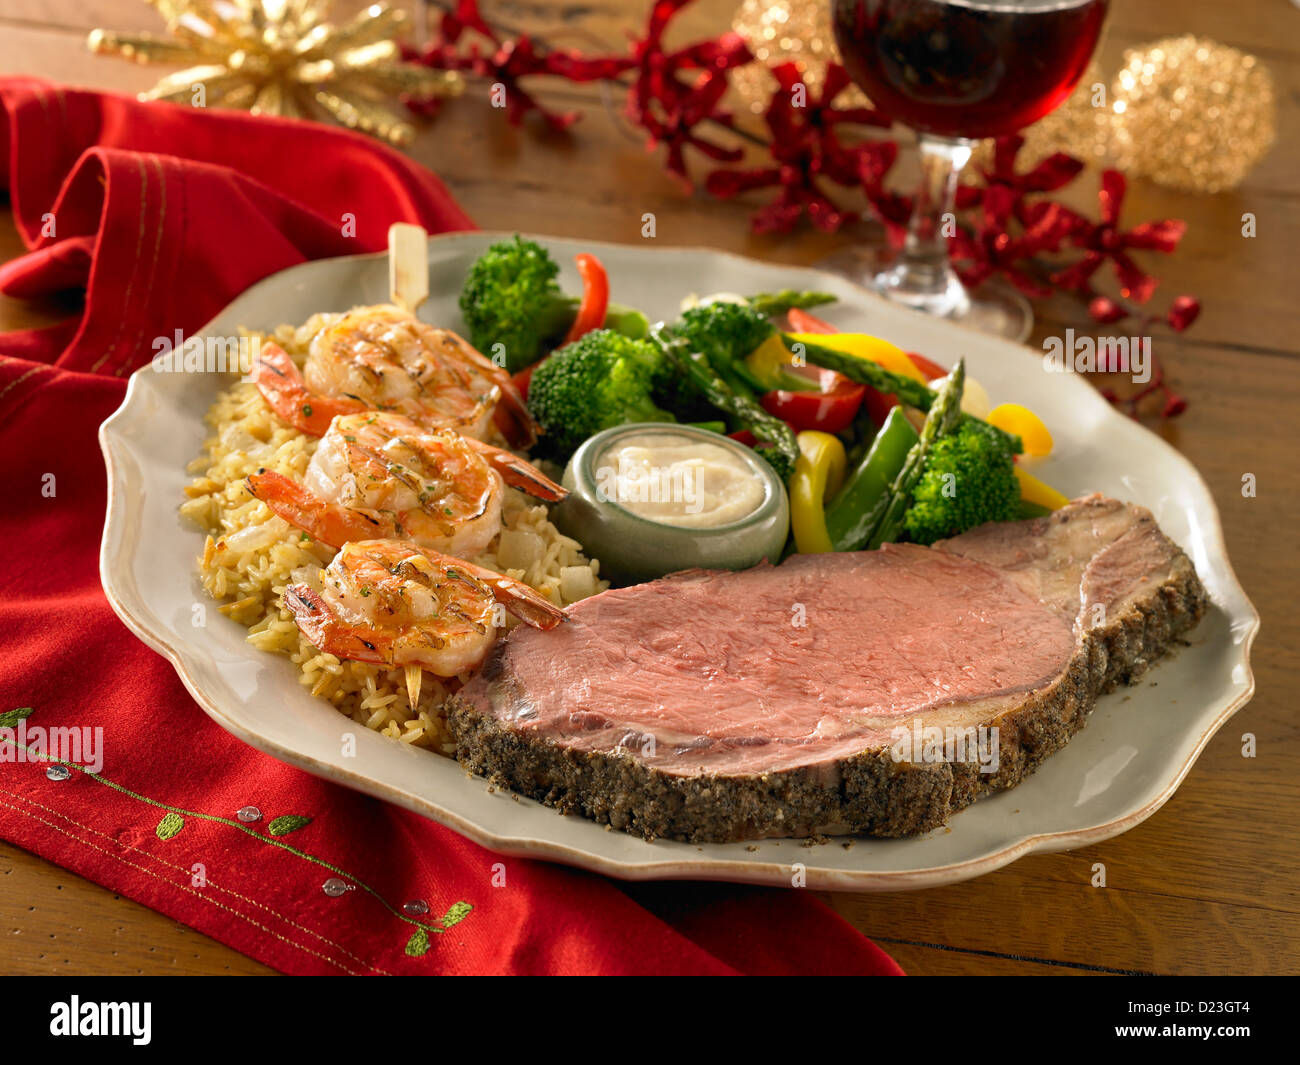 Prime Rib And Shrimp Dinner With Mixed Vegetables Rice And A Glass Stock Photo Alamy